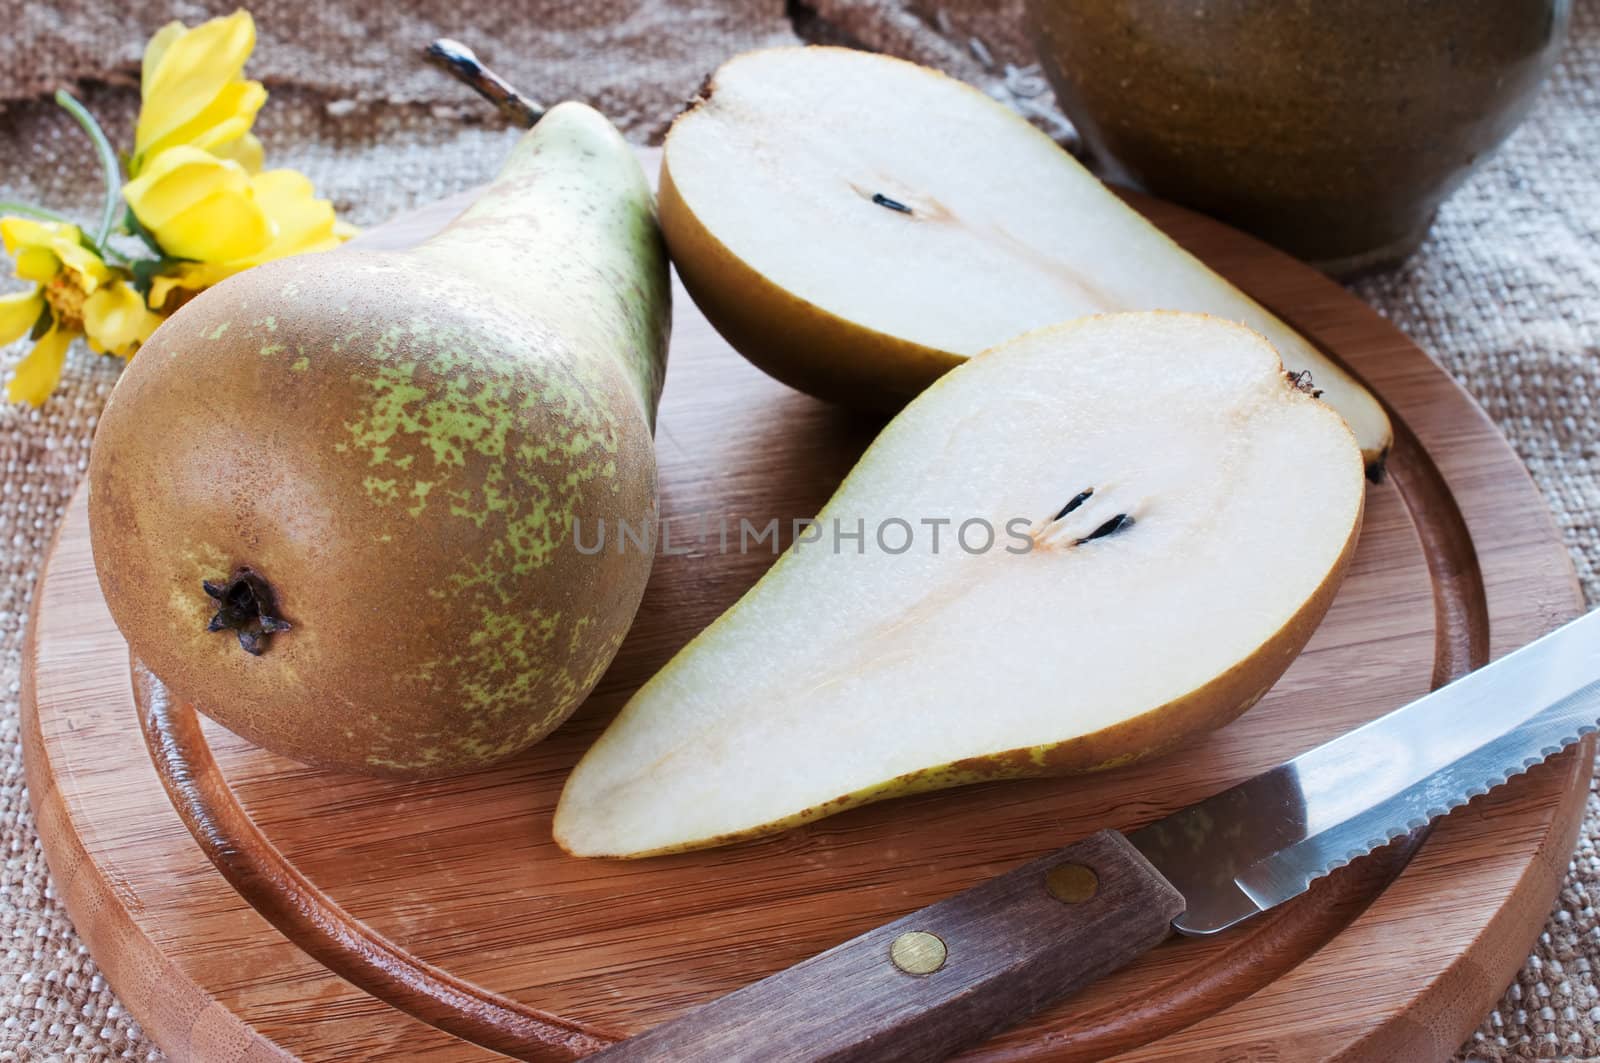 Cutted pears on cutting board